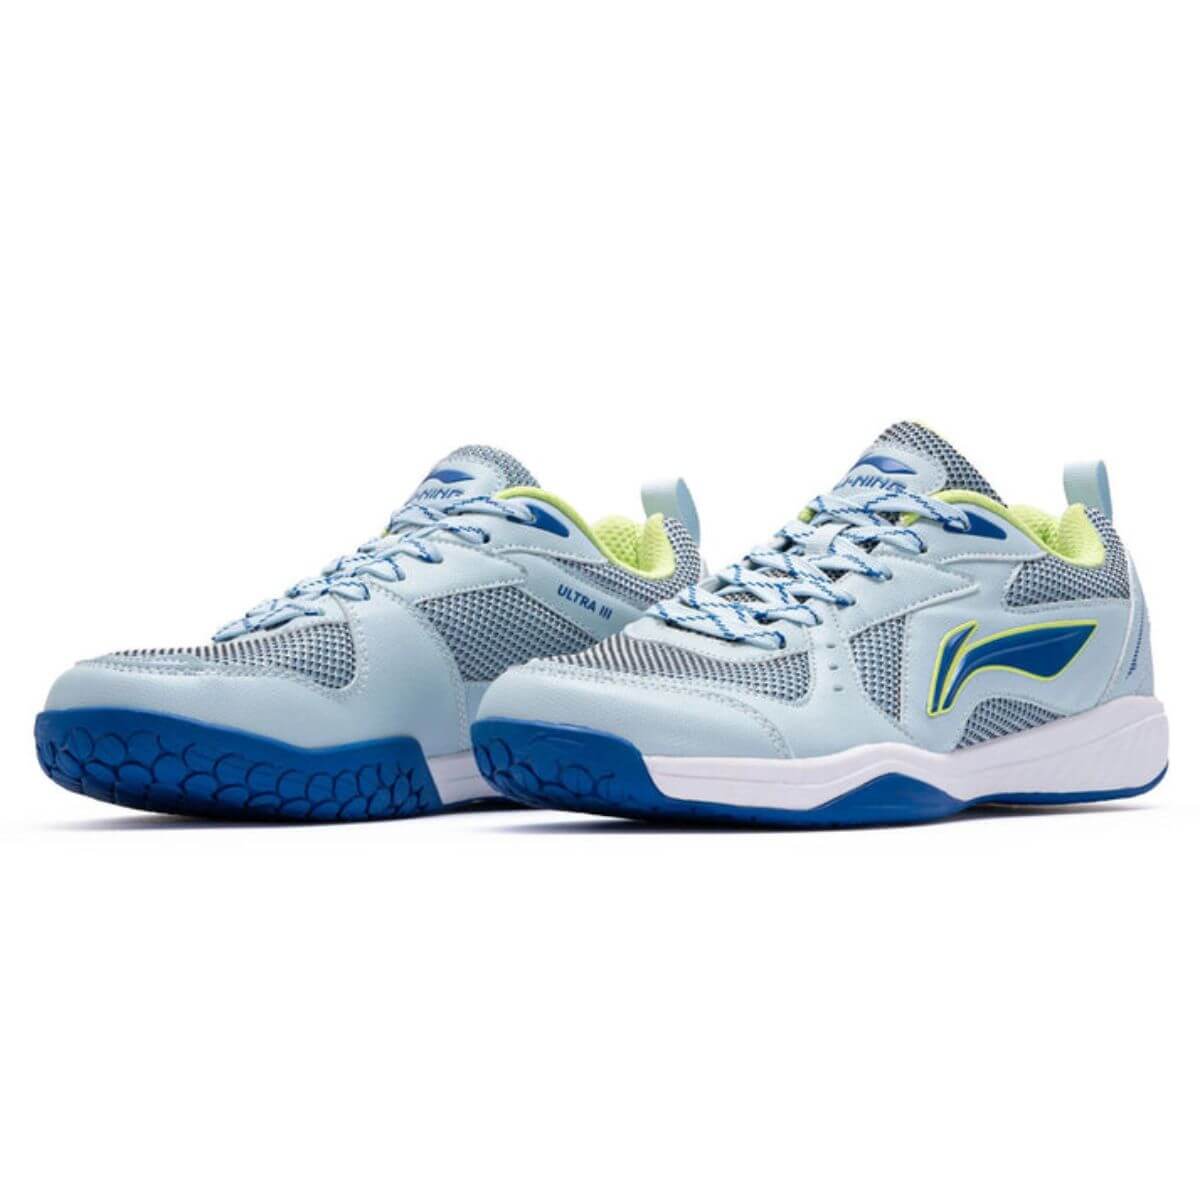 puma basketball shoes 2019 philippines in Siliguri at best price by Sant  Engineers & Fabricator Pvt Ltd - Justdial